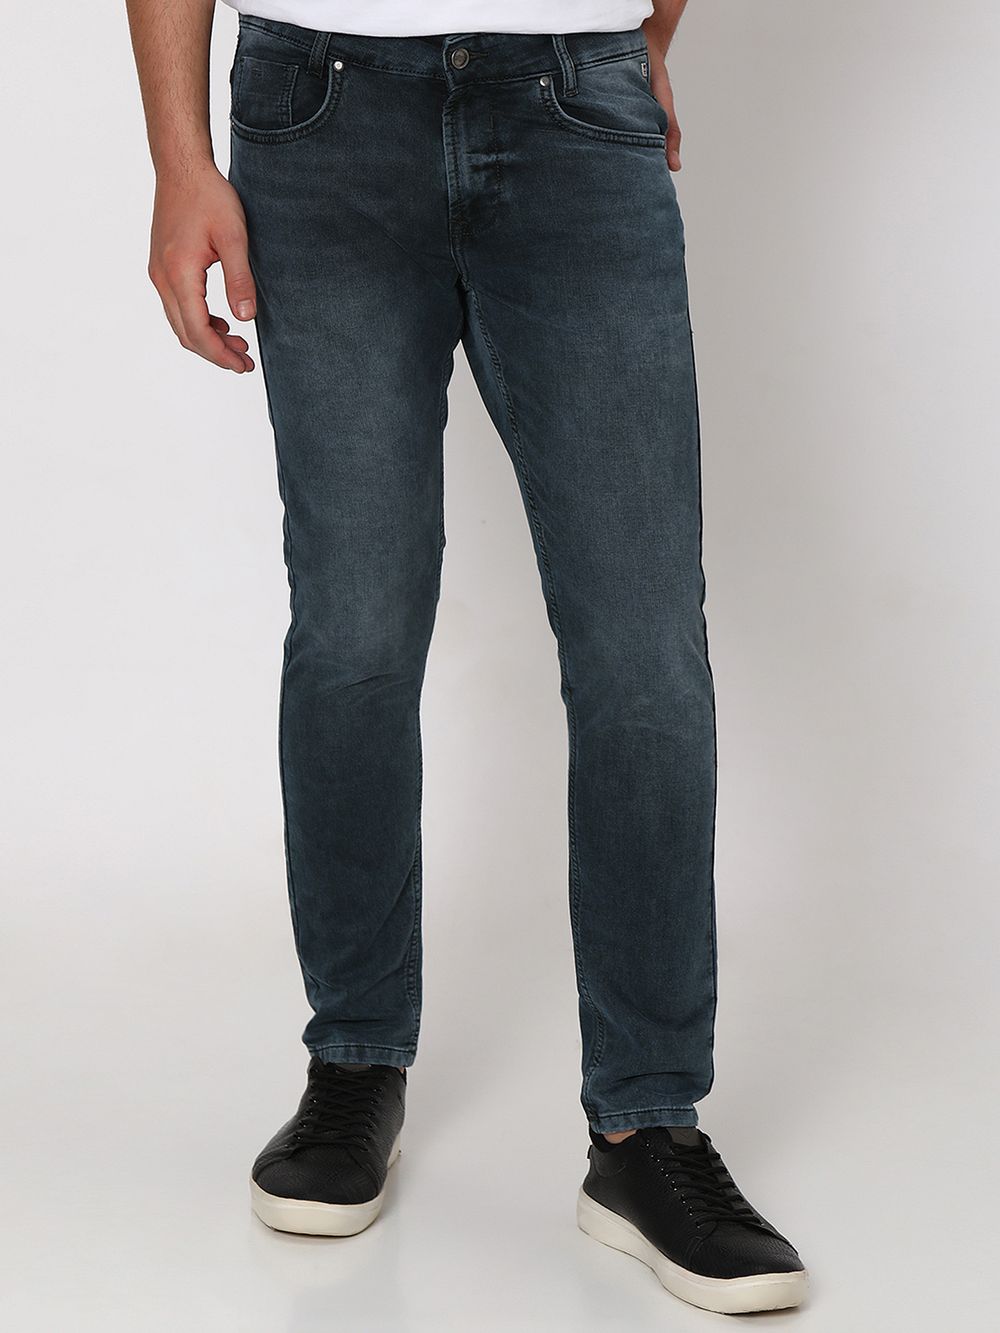 Olive Ankle Length Denim Deluxe Stretch Jeans